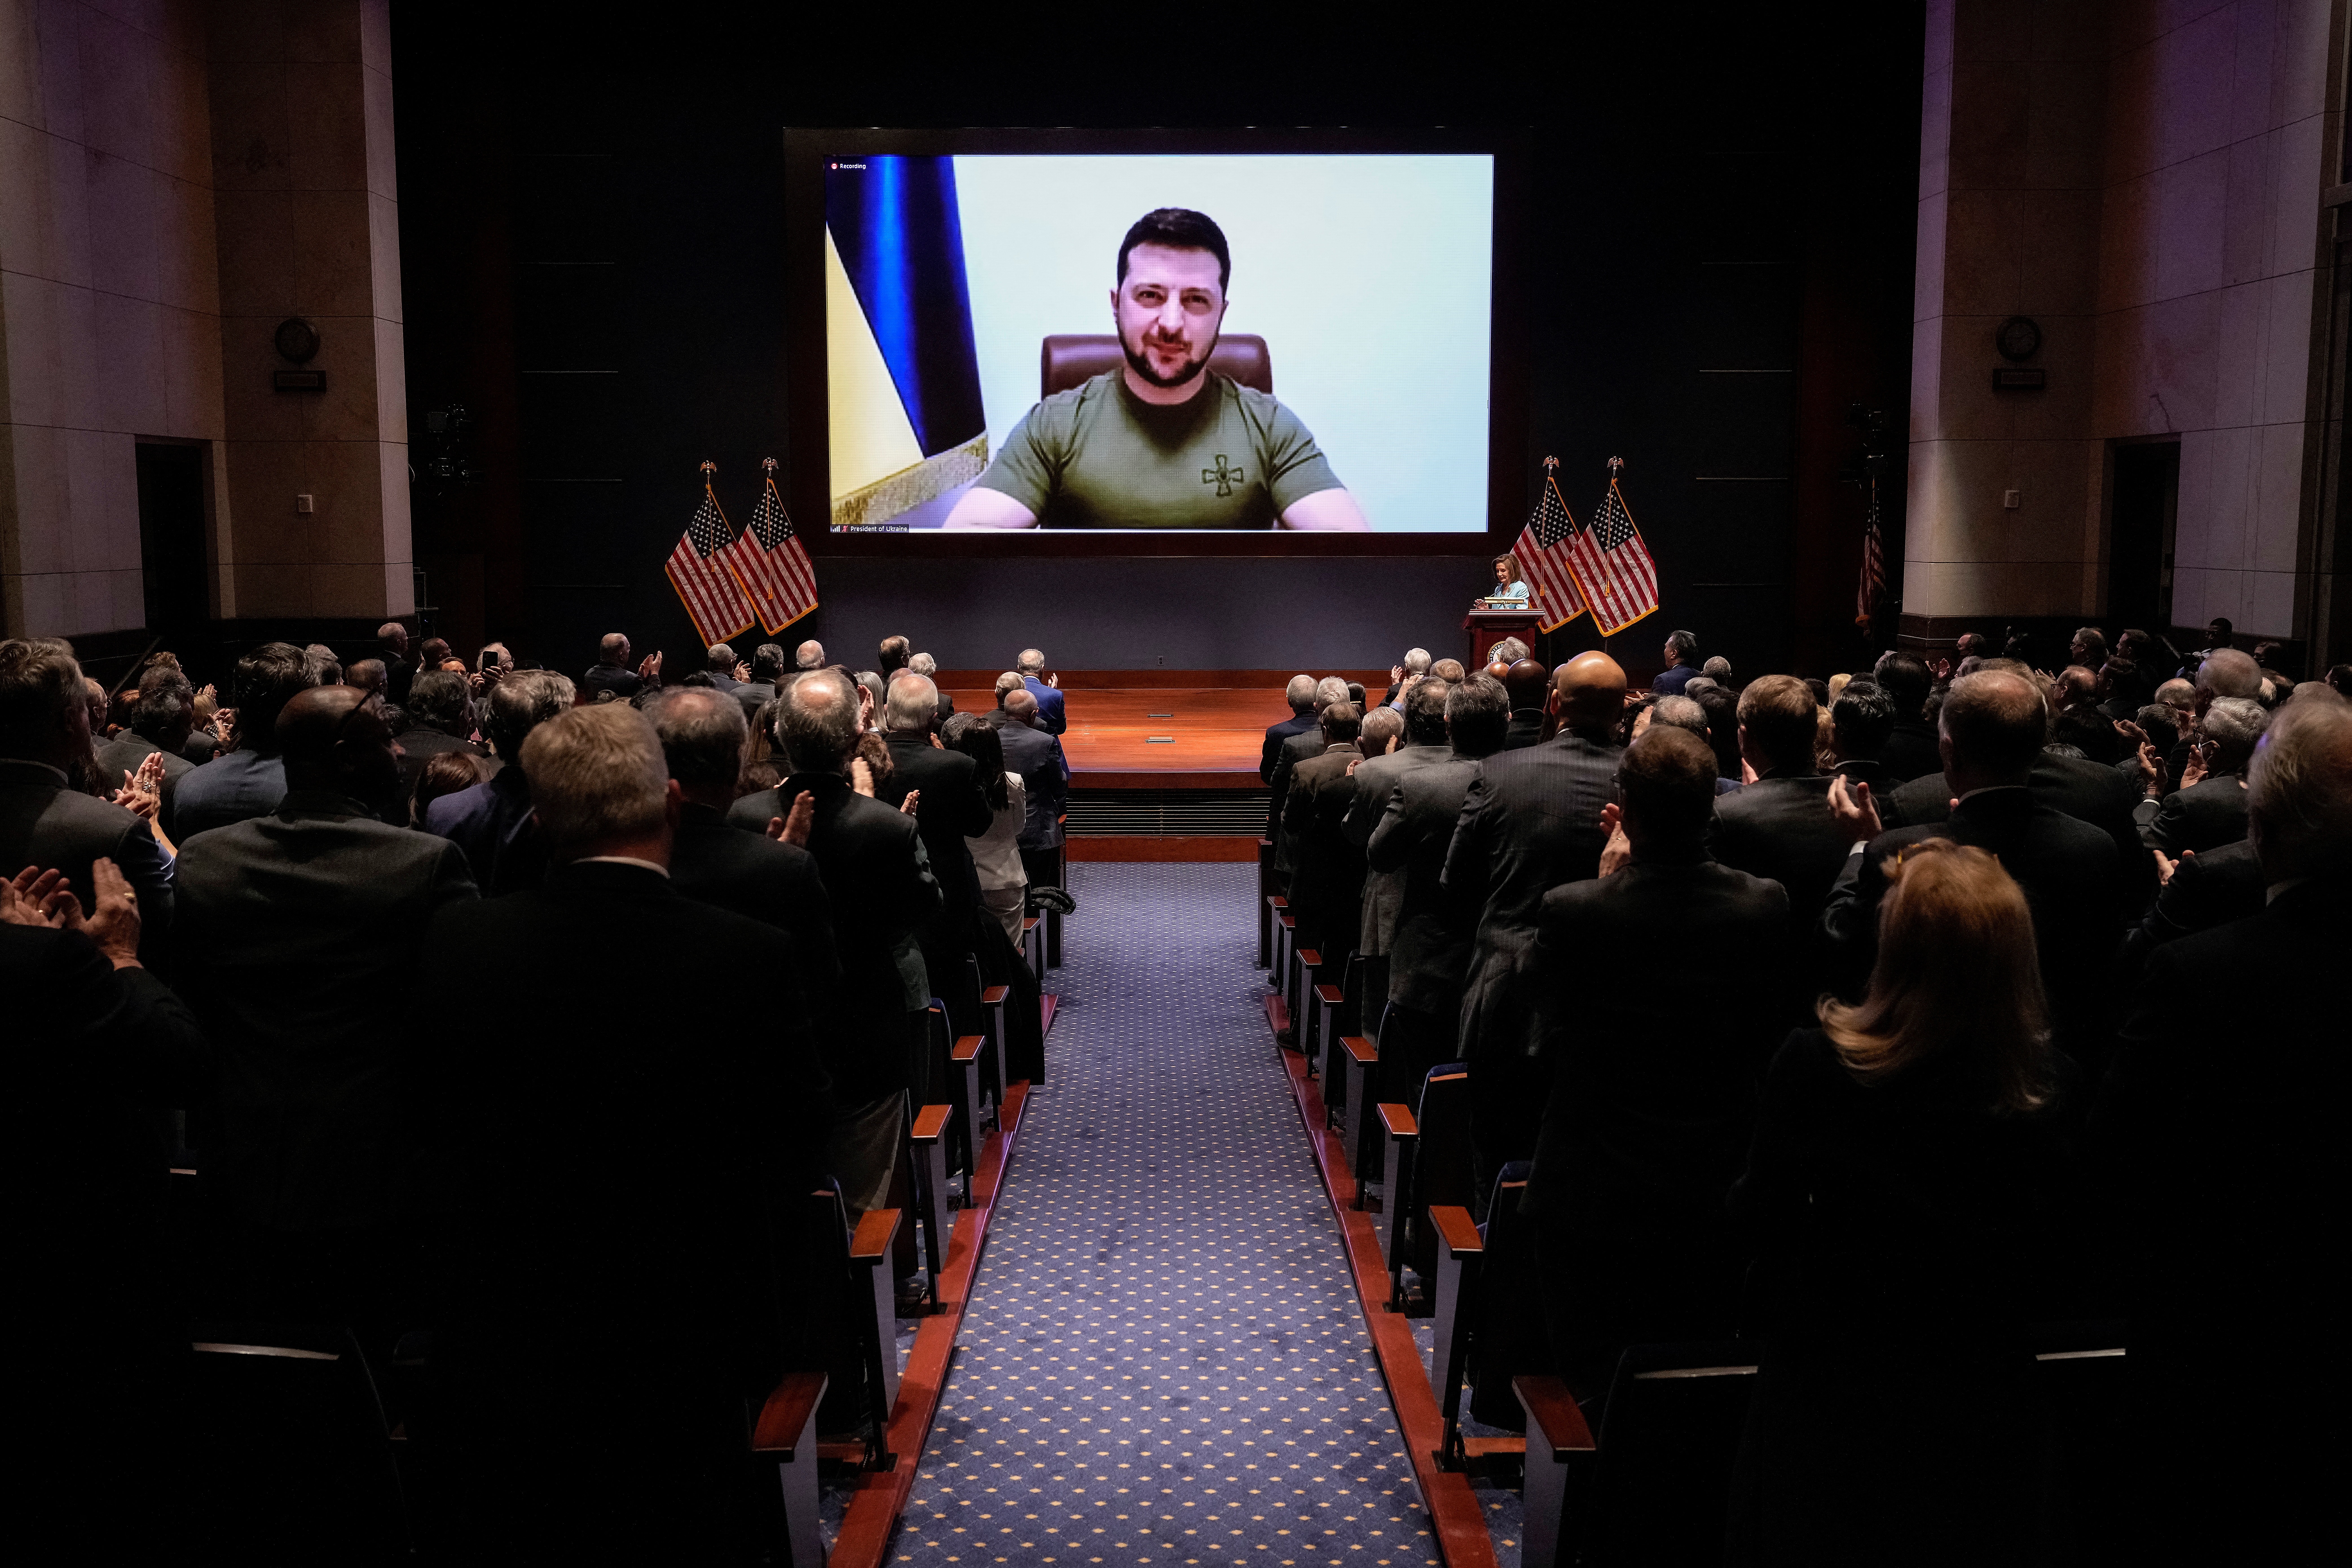 Ukraine's President Volodymyr Zelenskiy delivers video address to members of the U.S. Congress at the Capitol in Washington